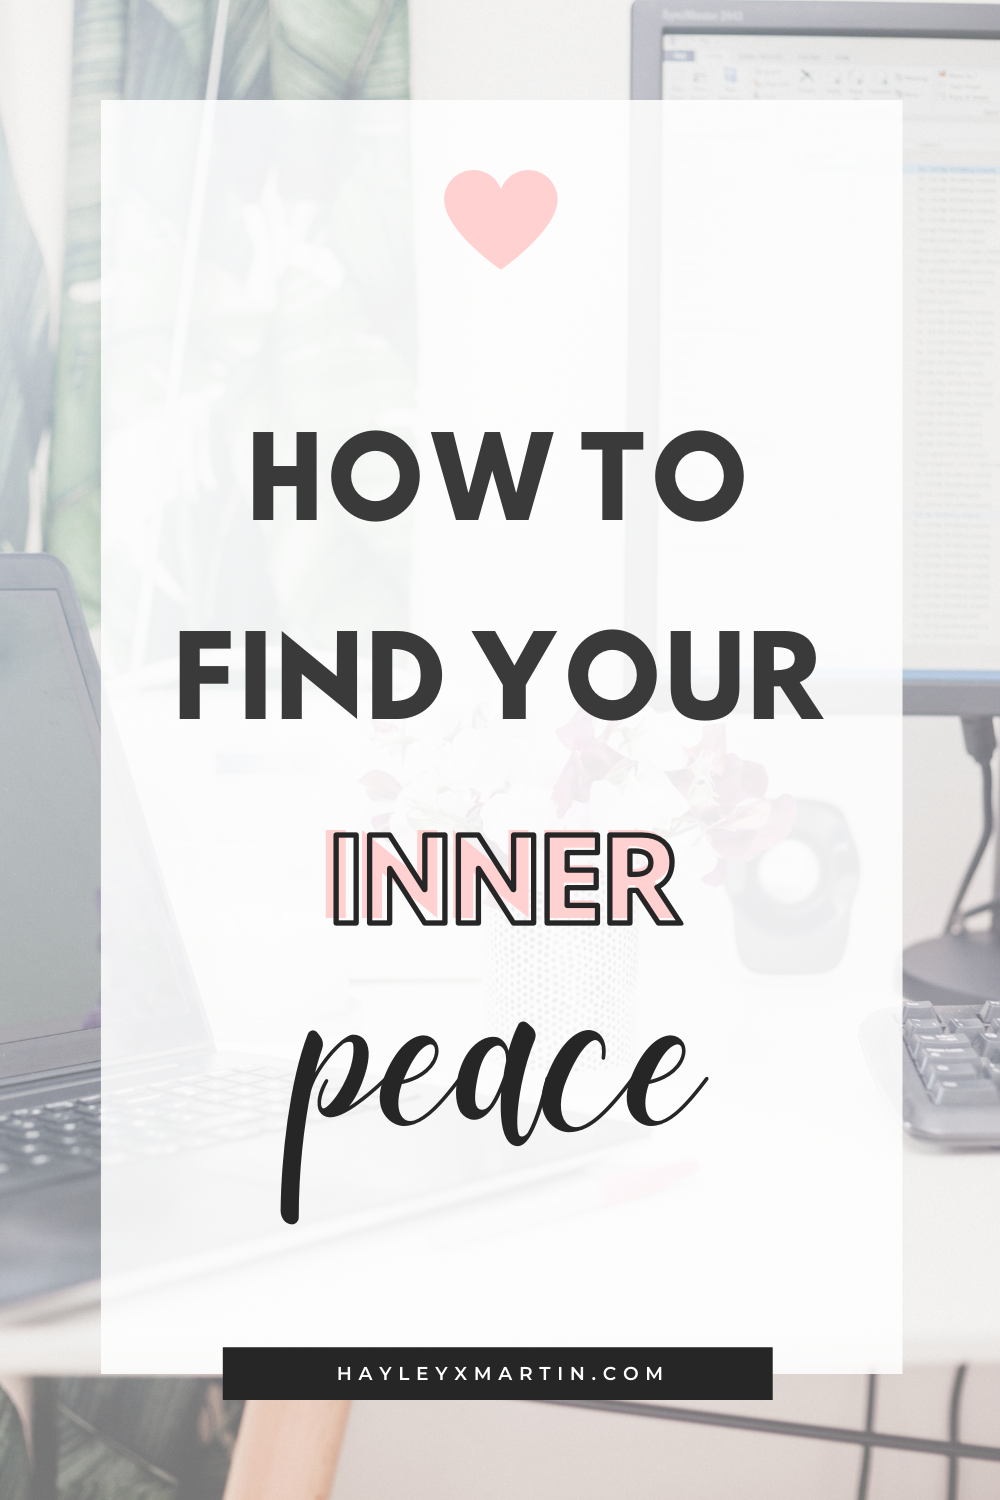 HOW TO FIND YOUR INNER PEACE